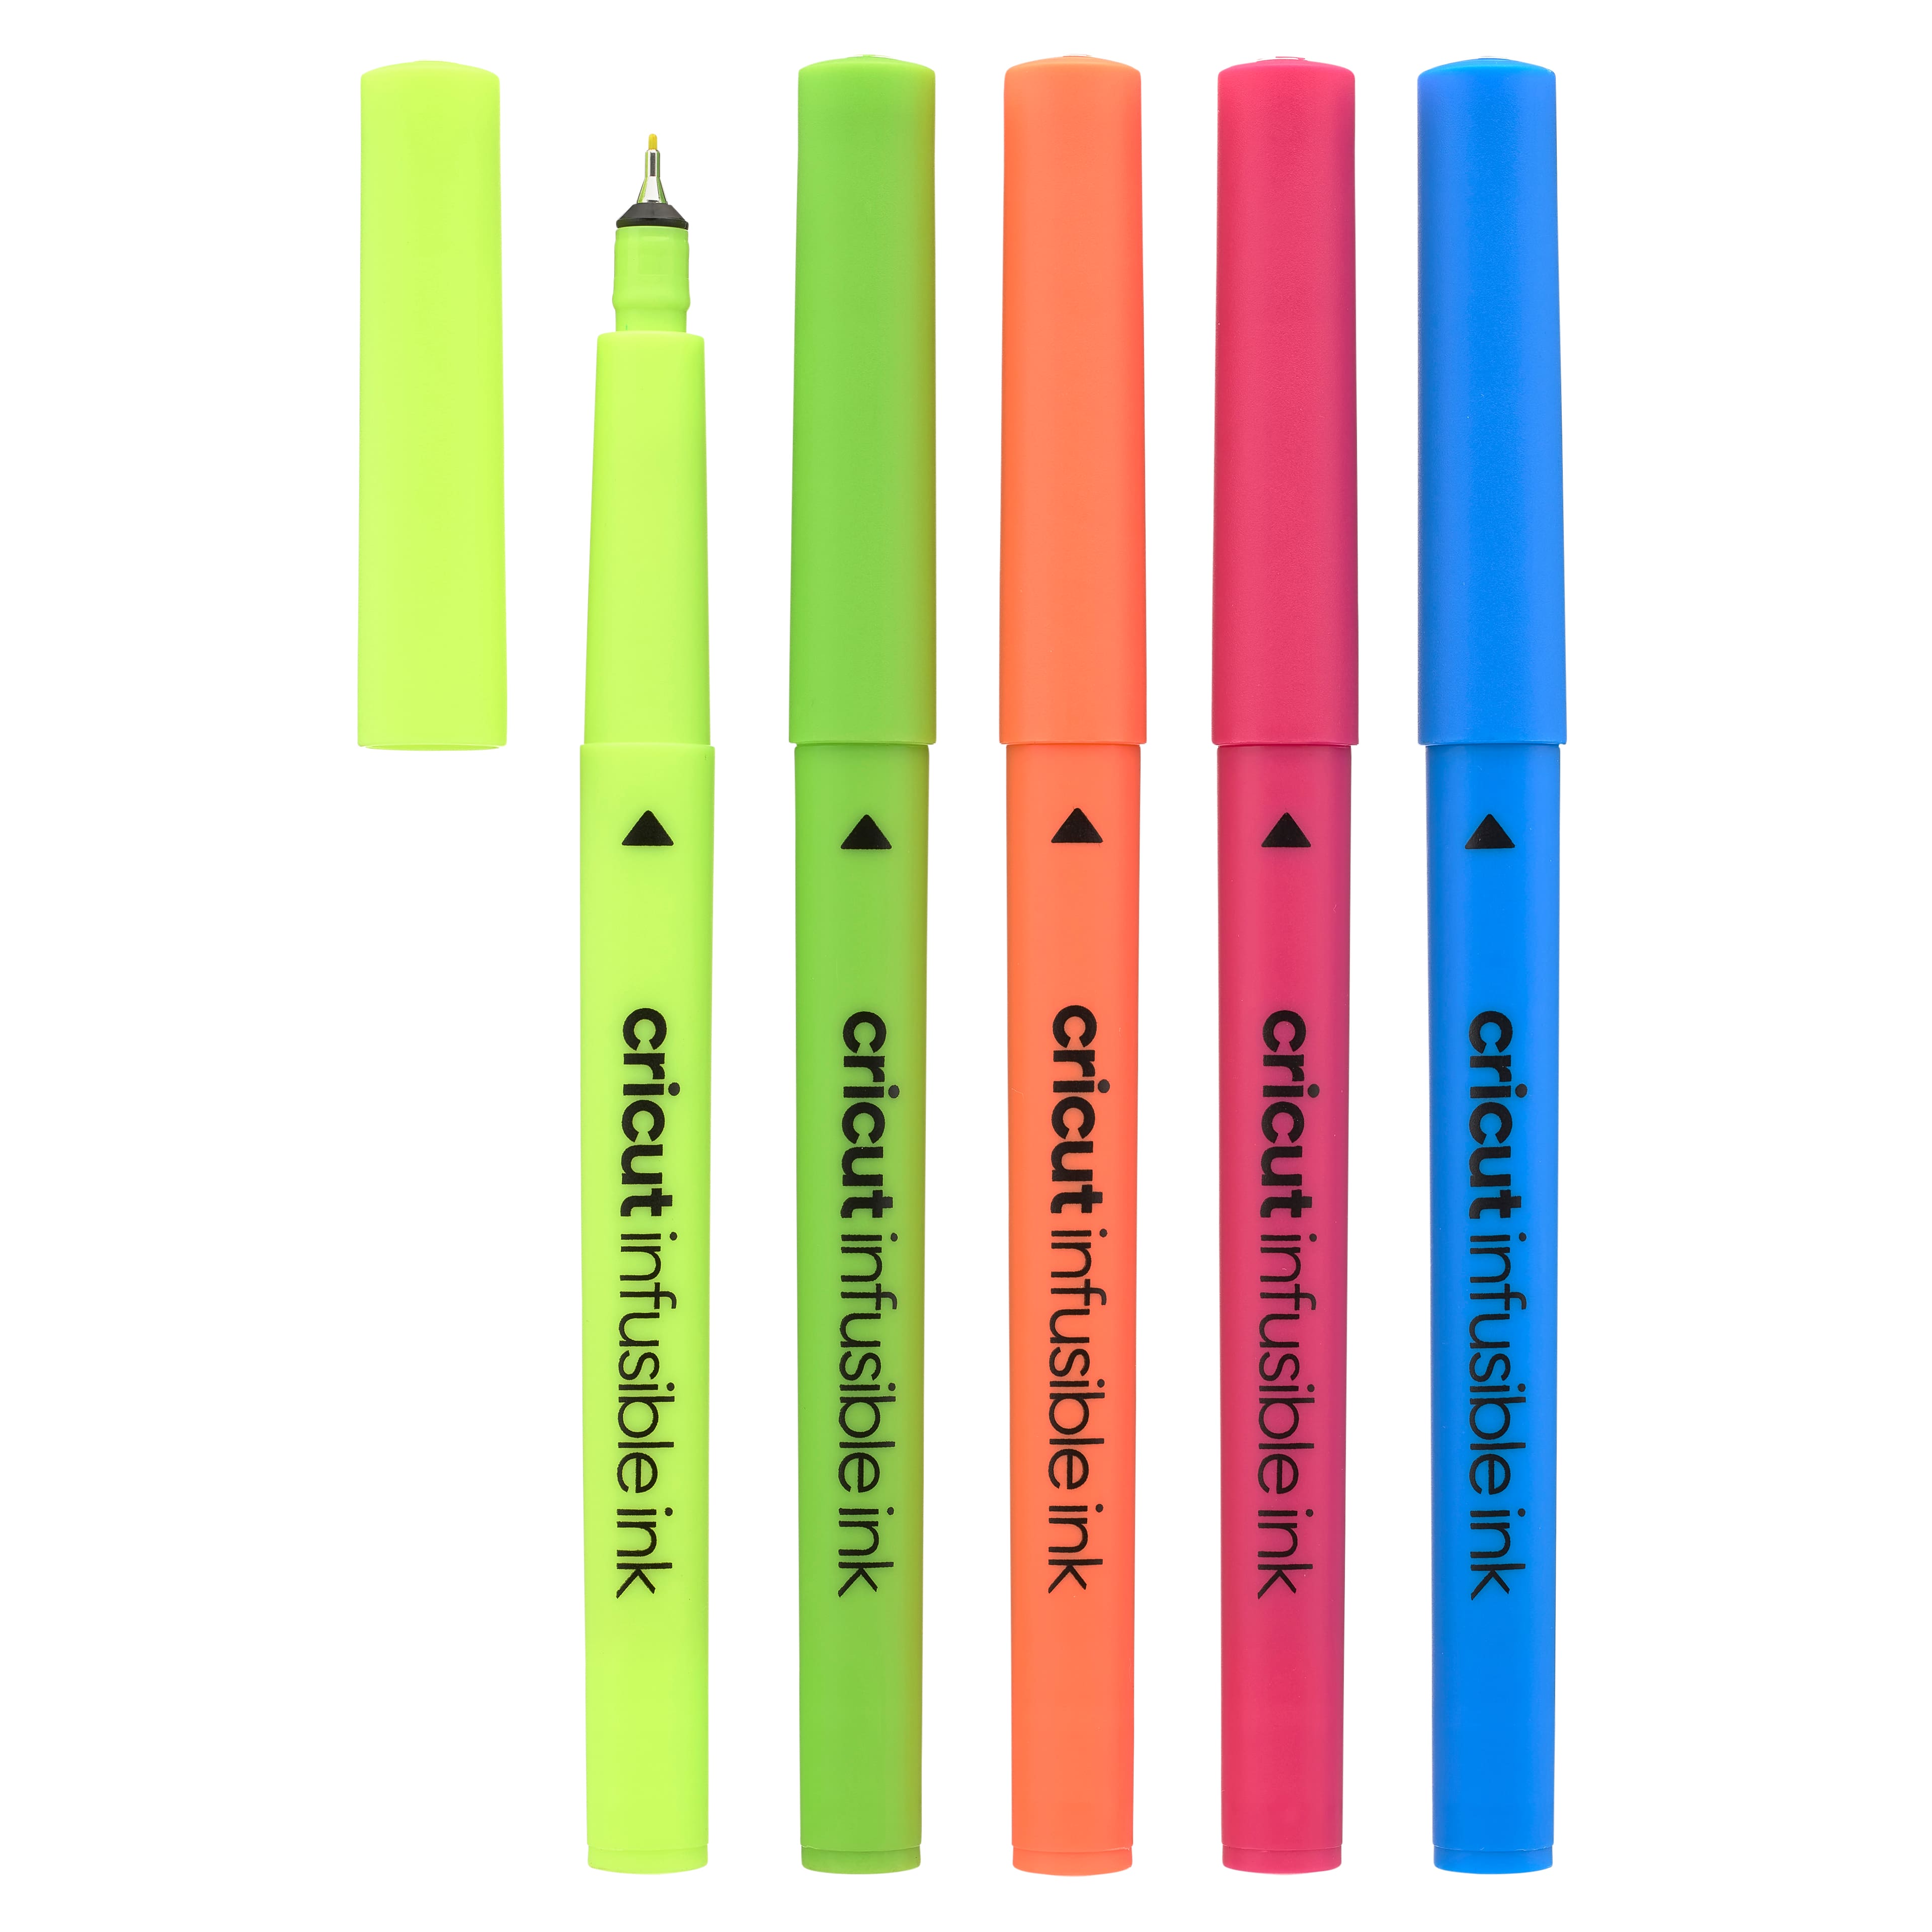 6 Packs: 5 Ct. (30 Total) Cricut Infusible Ink Neons Pens, Size: 8 x 4 x 0.5, Other